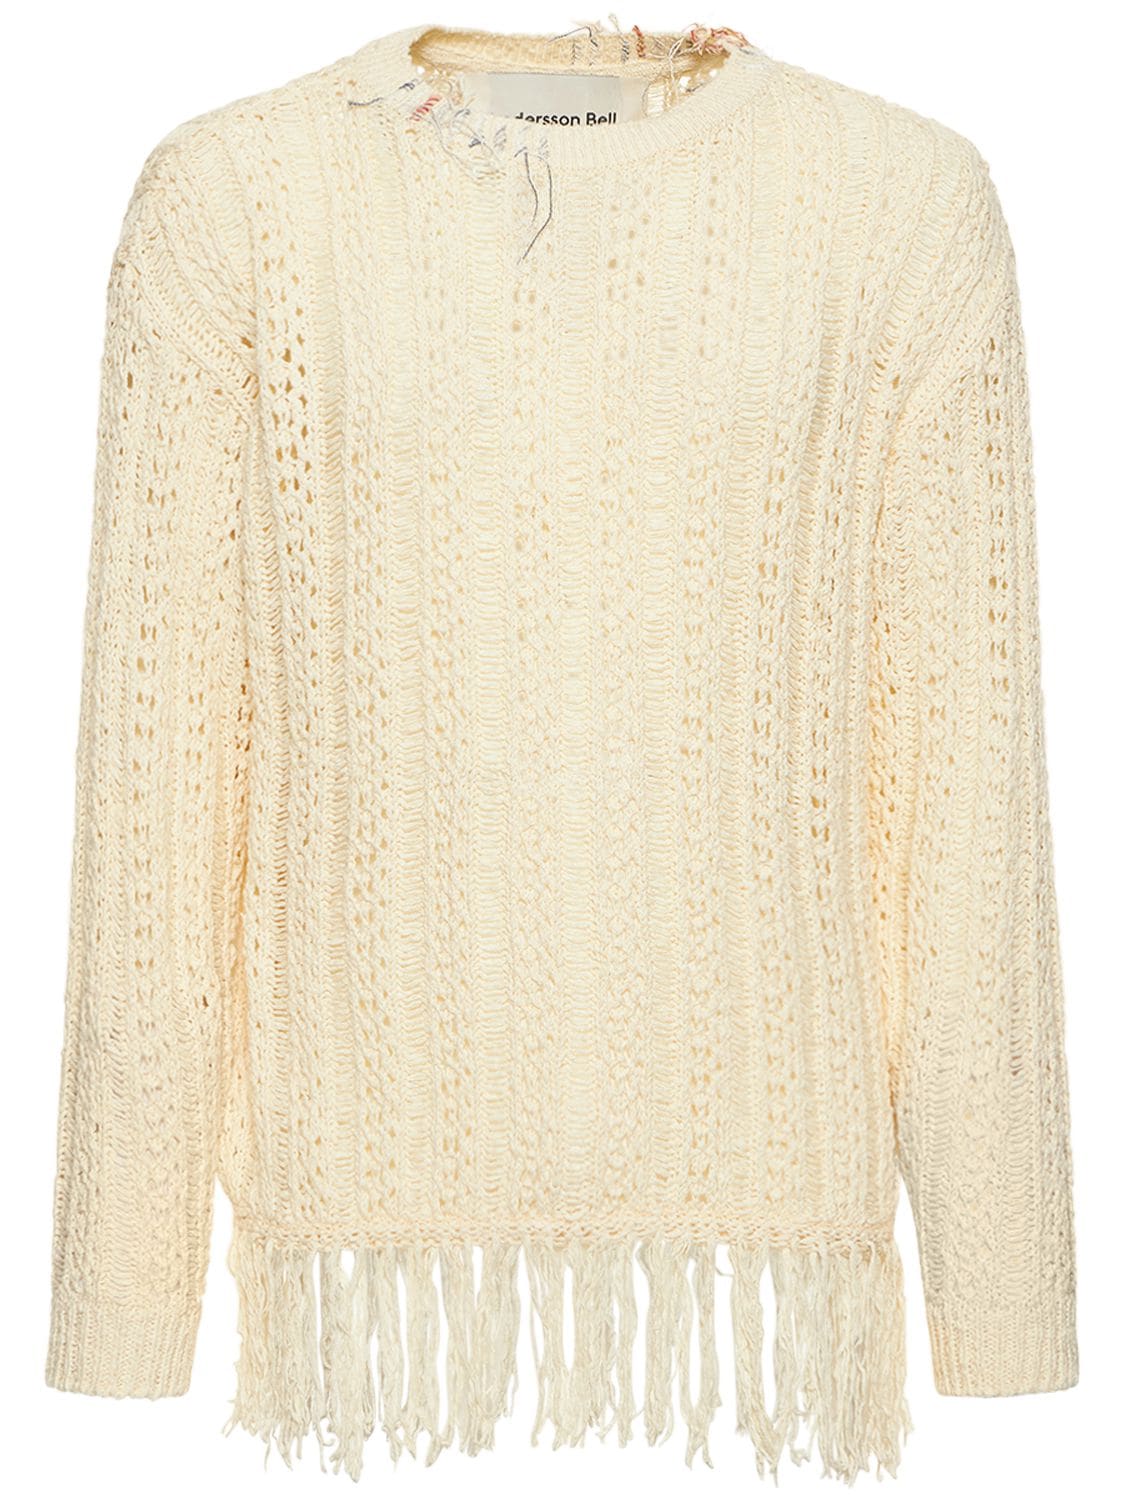 ANDERSSON BELL Cable Knit Cotton Sweater